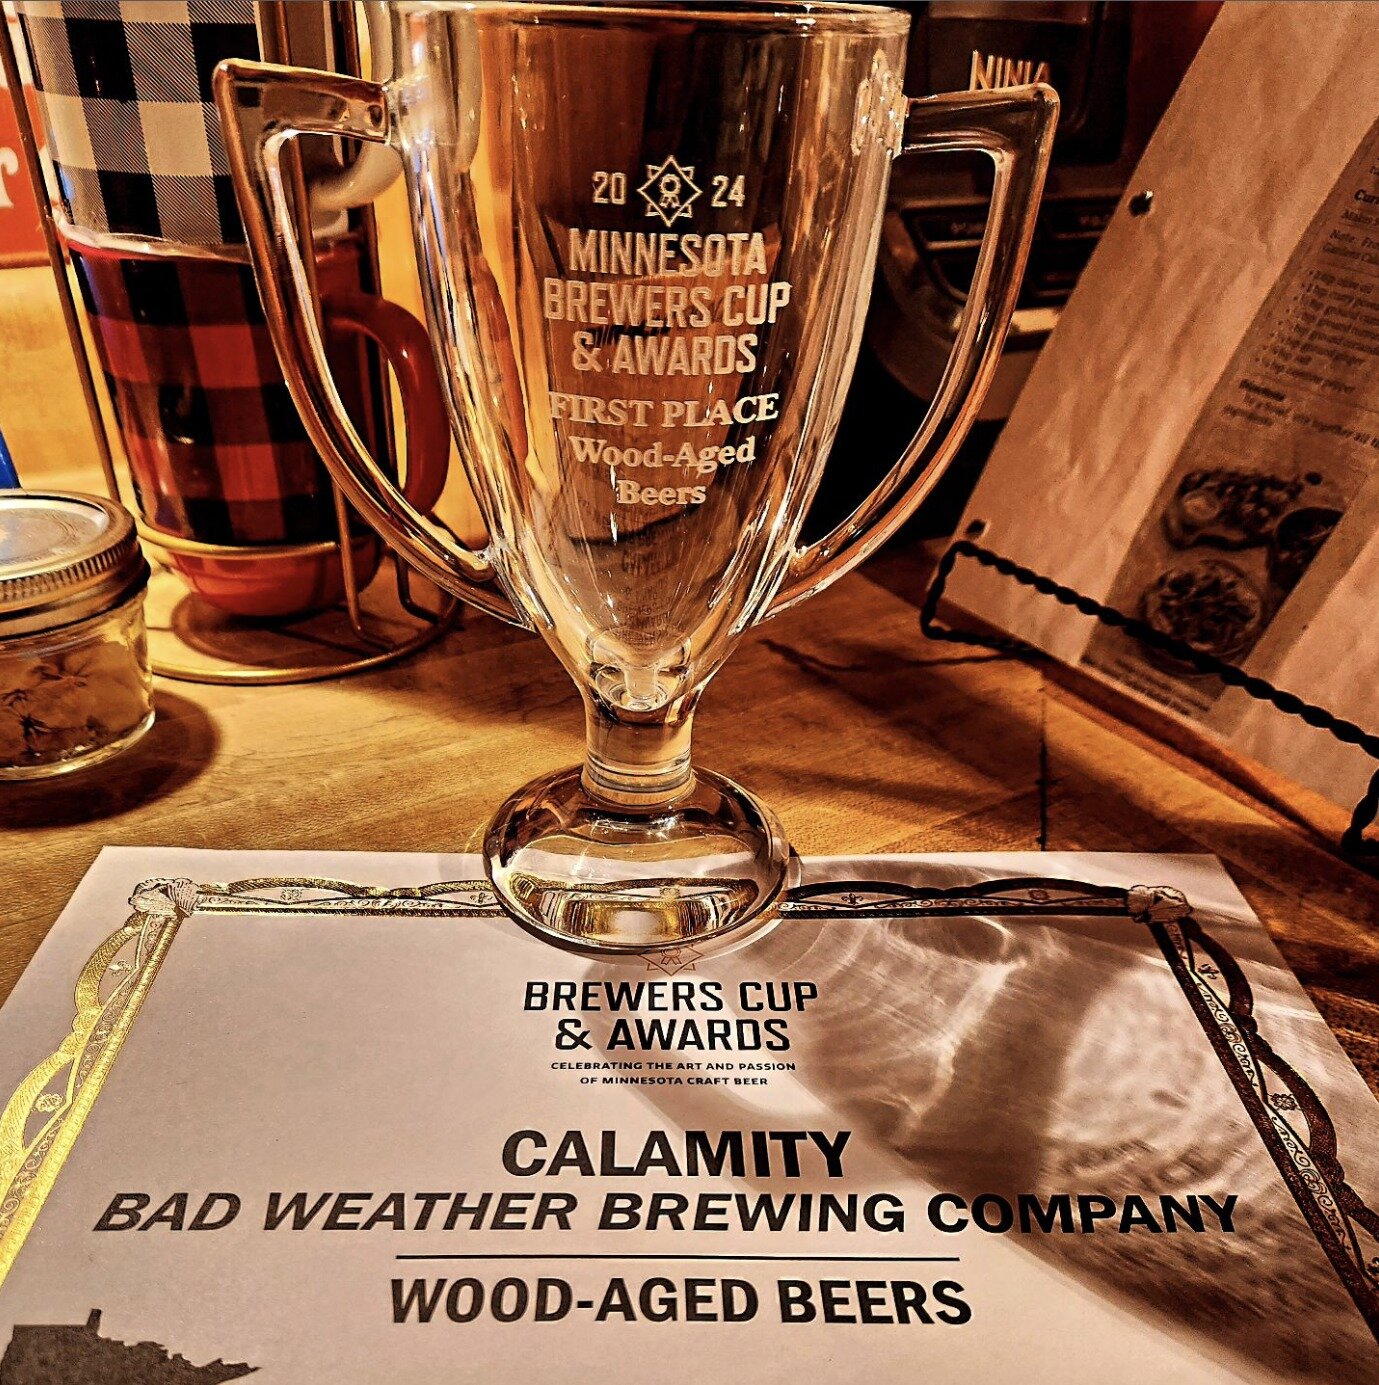 Barrel Aged Calamity placed first place in the Wood-aged beer category in last night's @mncraftbrewersguild Brewers Cup. Thrilled for incredibly passionate production team who always knock the beers out of the park. 

What's even better than getting 